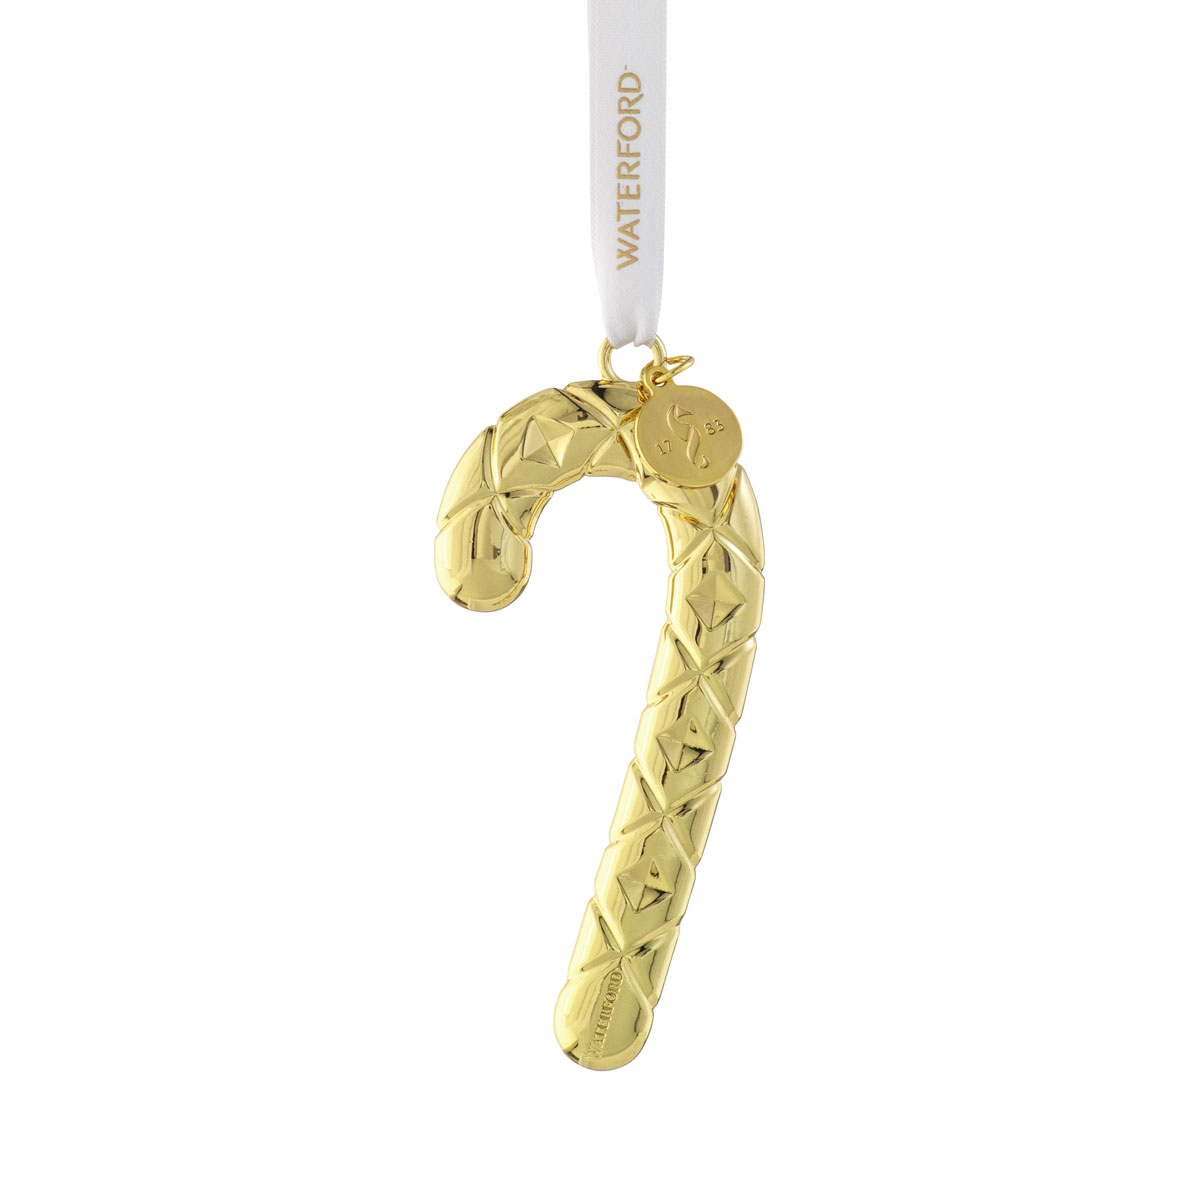 Waterford 2022 Candy Cane Golden Ornament